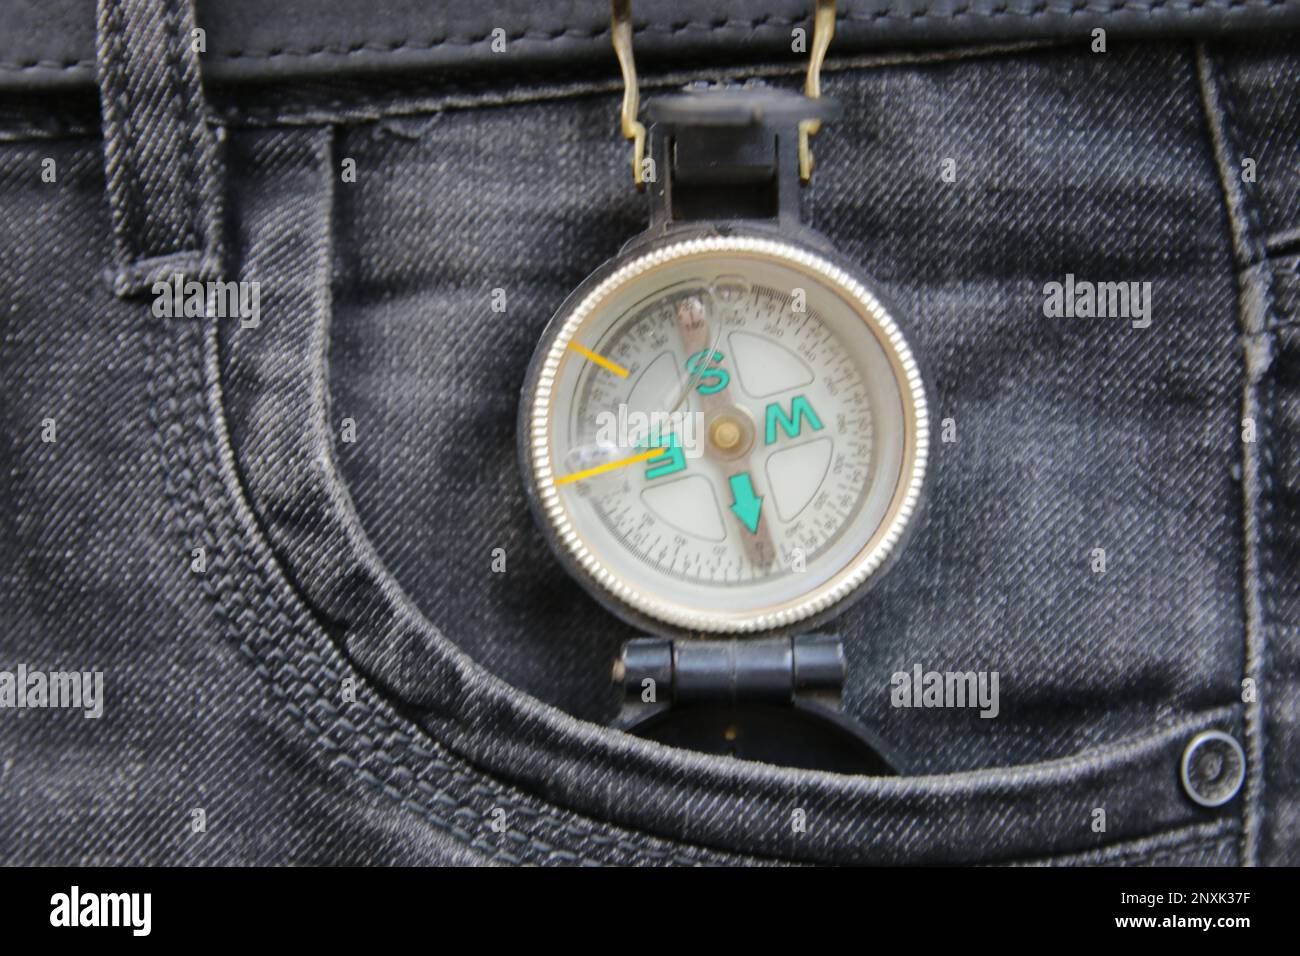 Navigation Compass, Old-fashioned Pocket Compass With Luminous